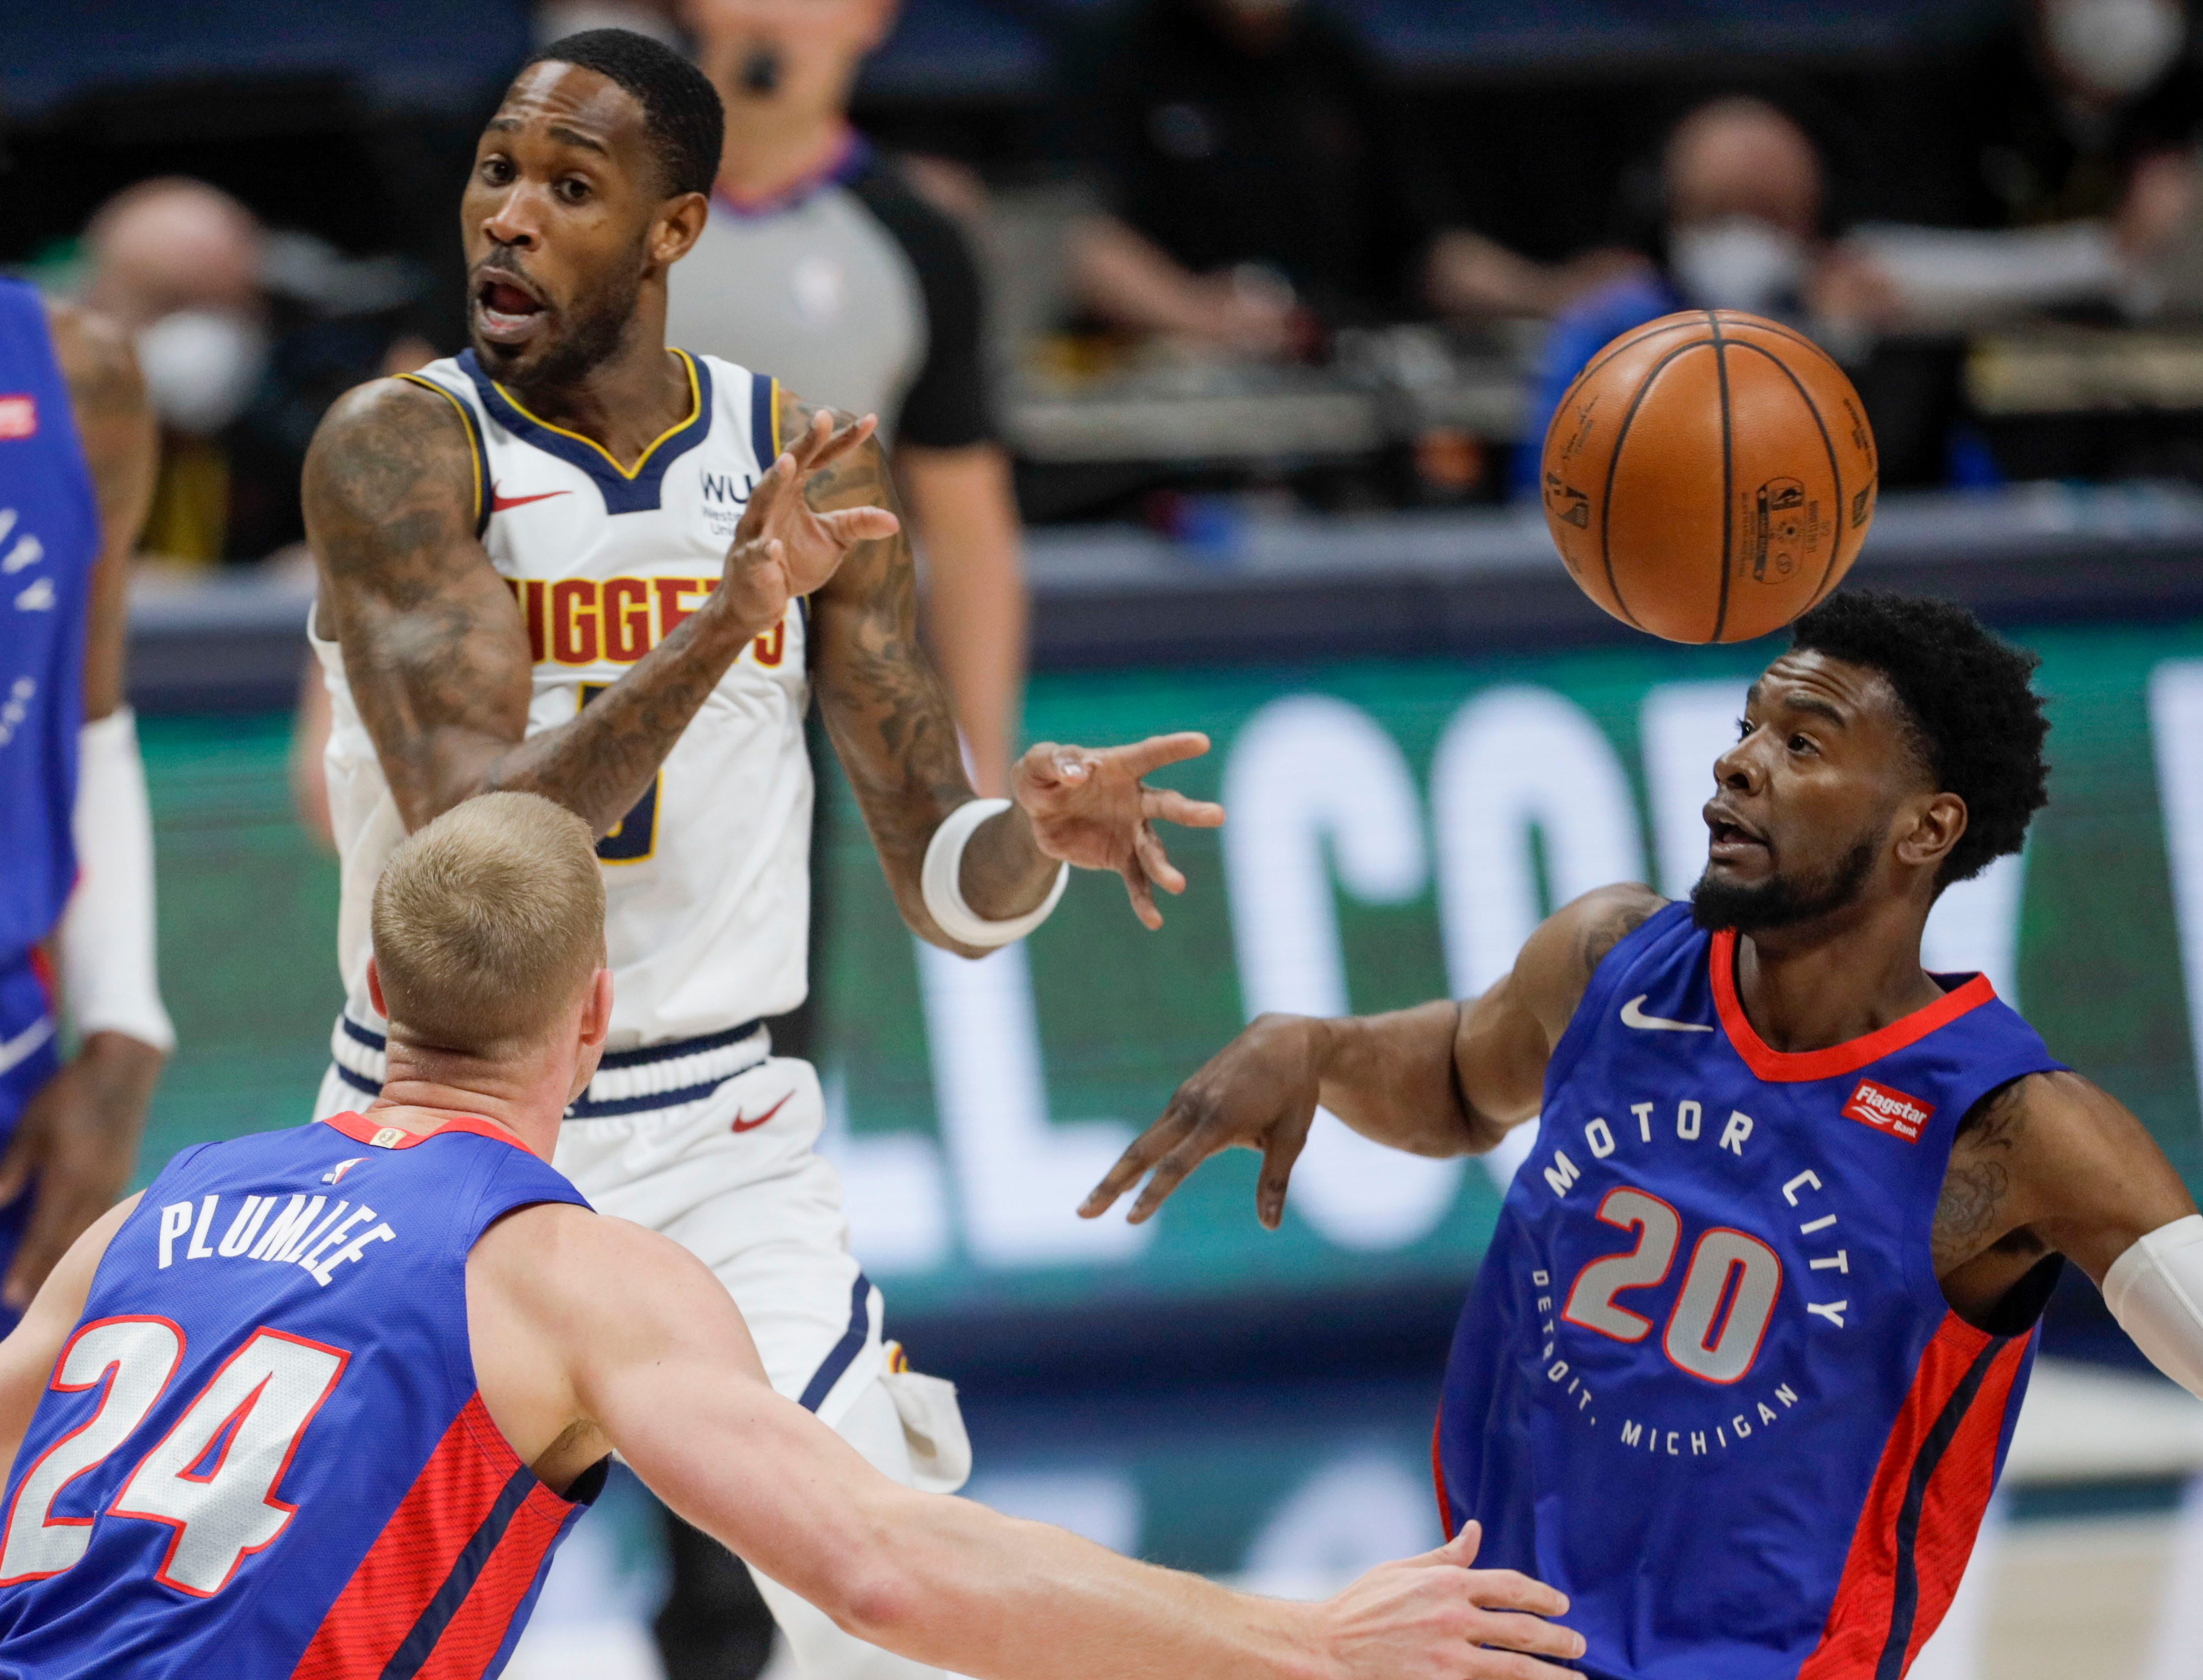 Denver Nuggets forward Will Barton, left, passes between Detroit Pistons center Mason Plumlee (24) and guard Josh Jackson (20) in the first quarter of an NBA basketball game in Denver, Tuesday, April 6, 2021.